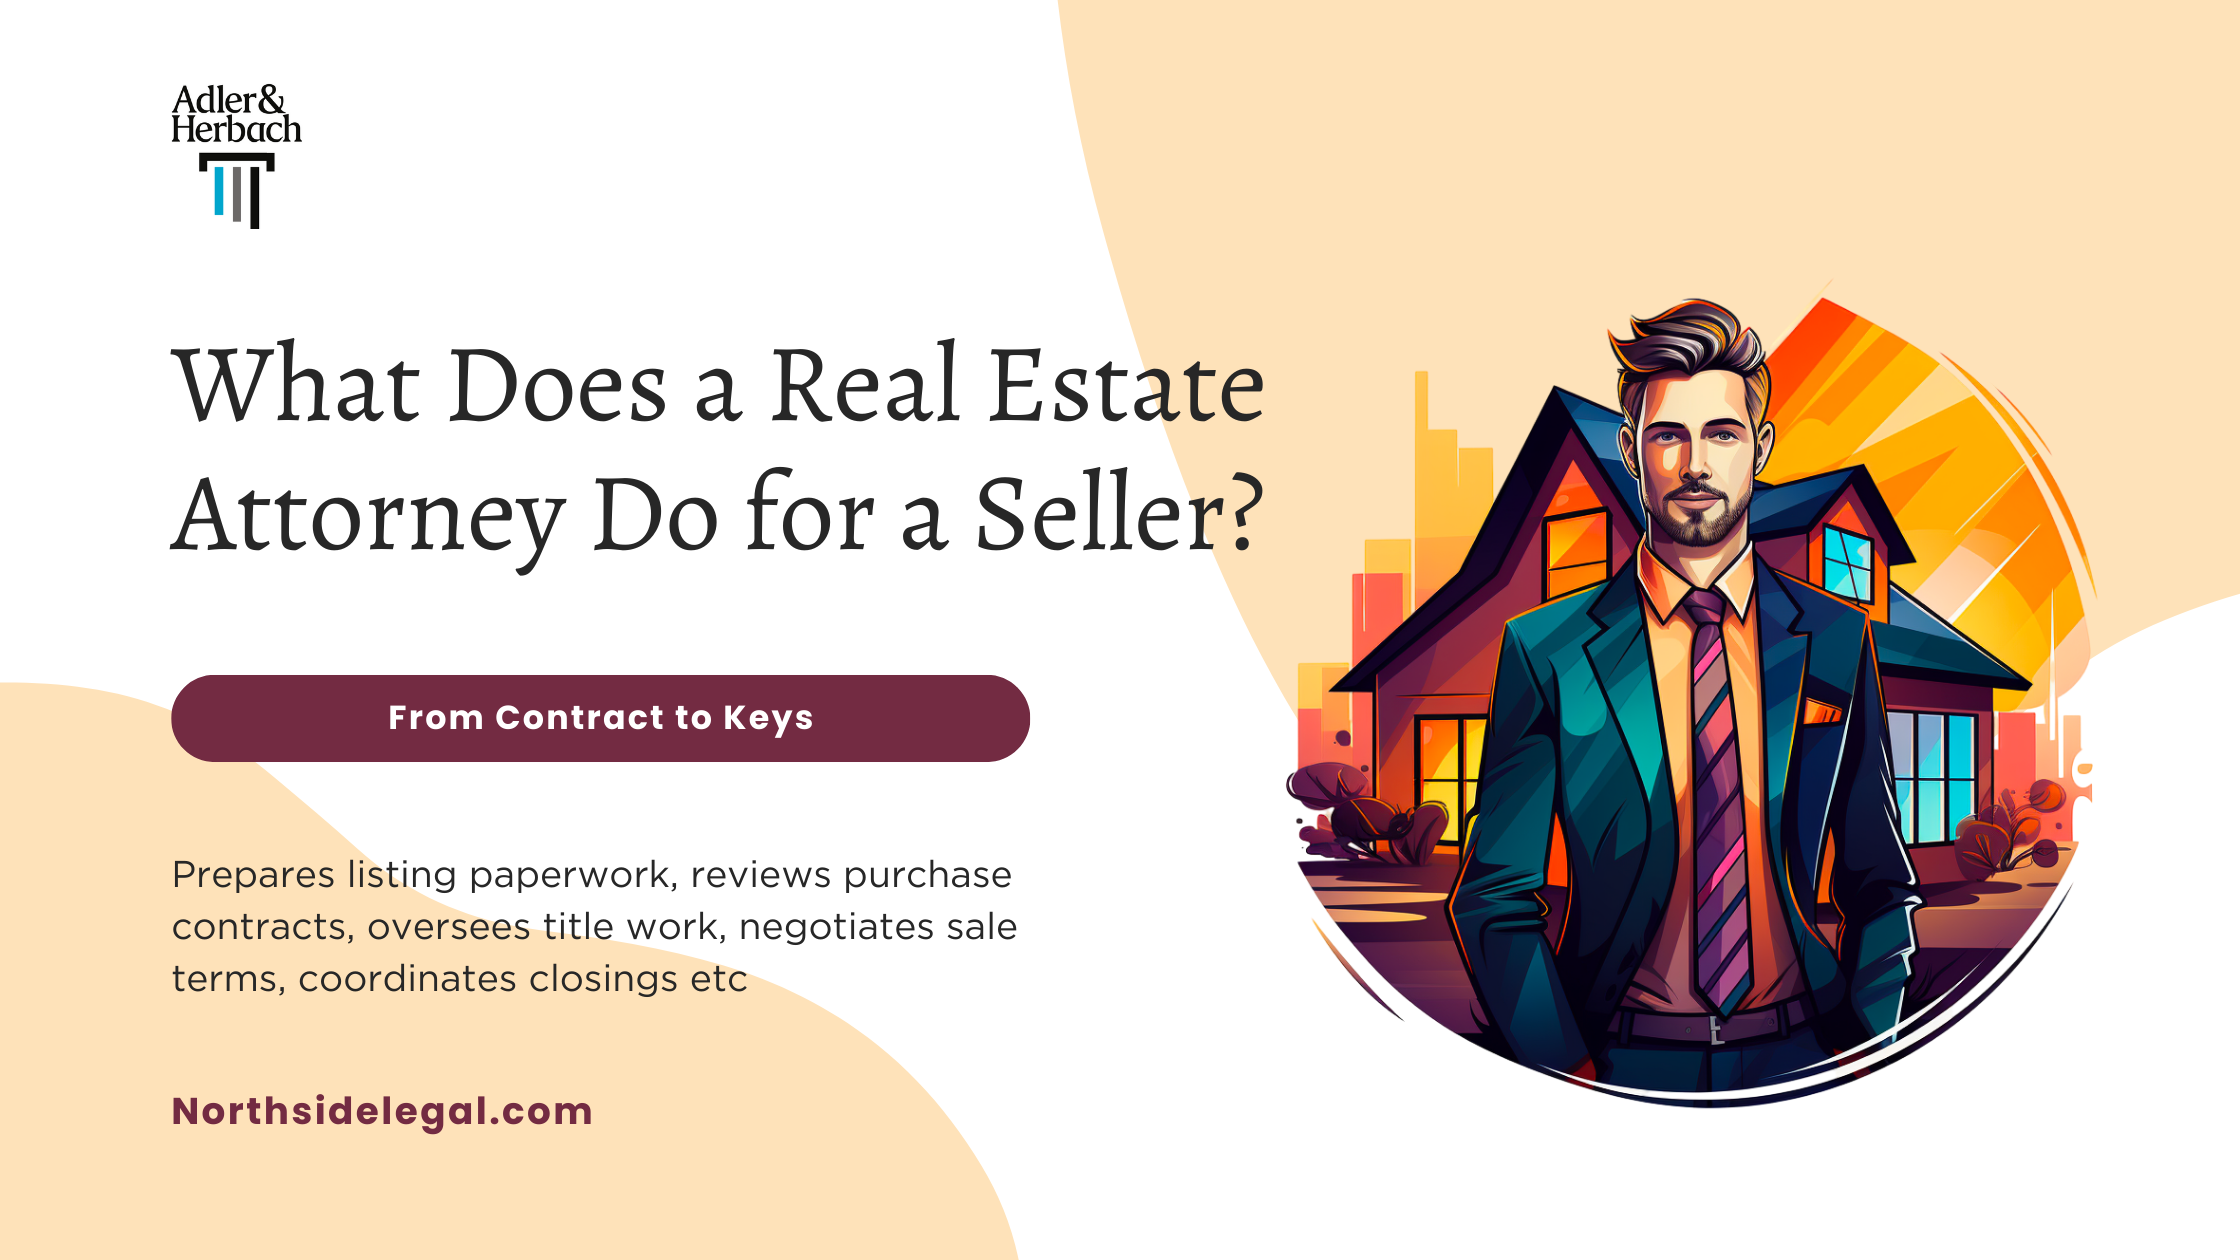 What Does a Real Estate Attorney Do for a Seller in Illinois?